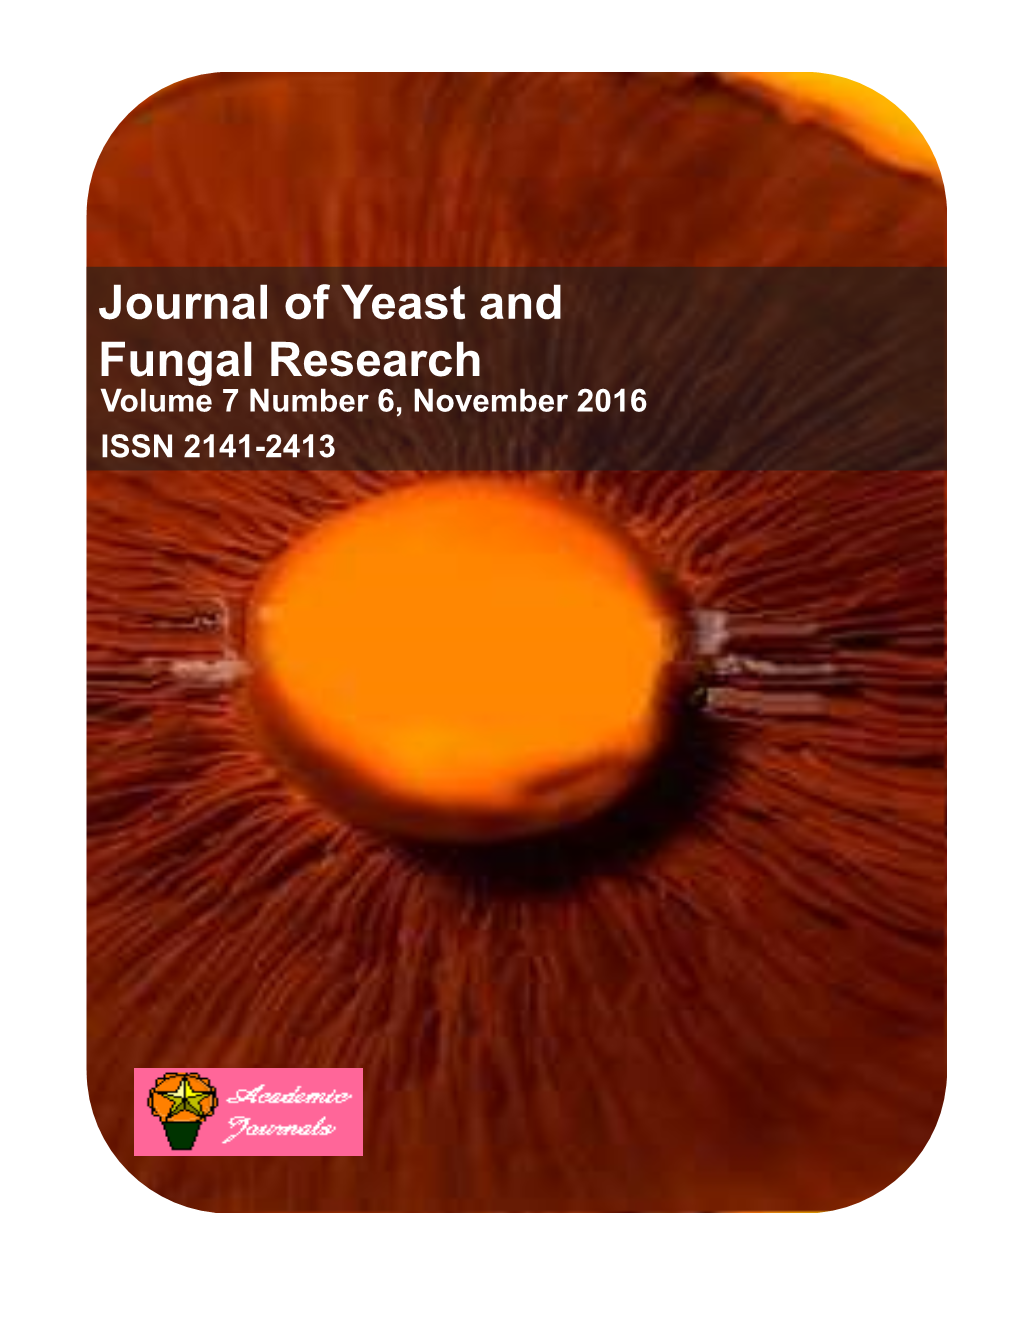 Journal of Yeast and Fungal Research Volume 7 Number 6, November 2016 ISSN 2141-2413